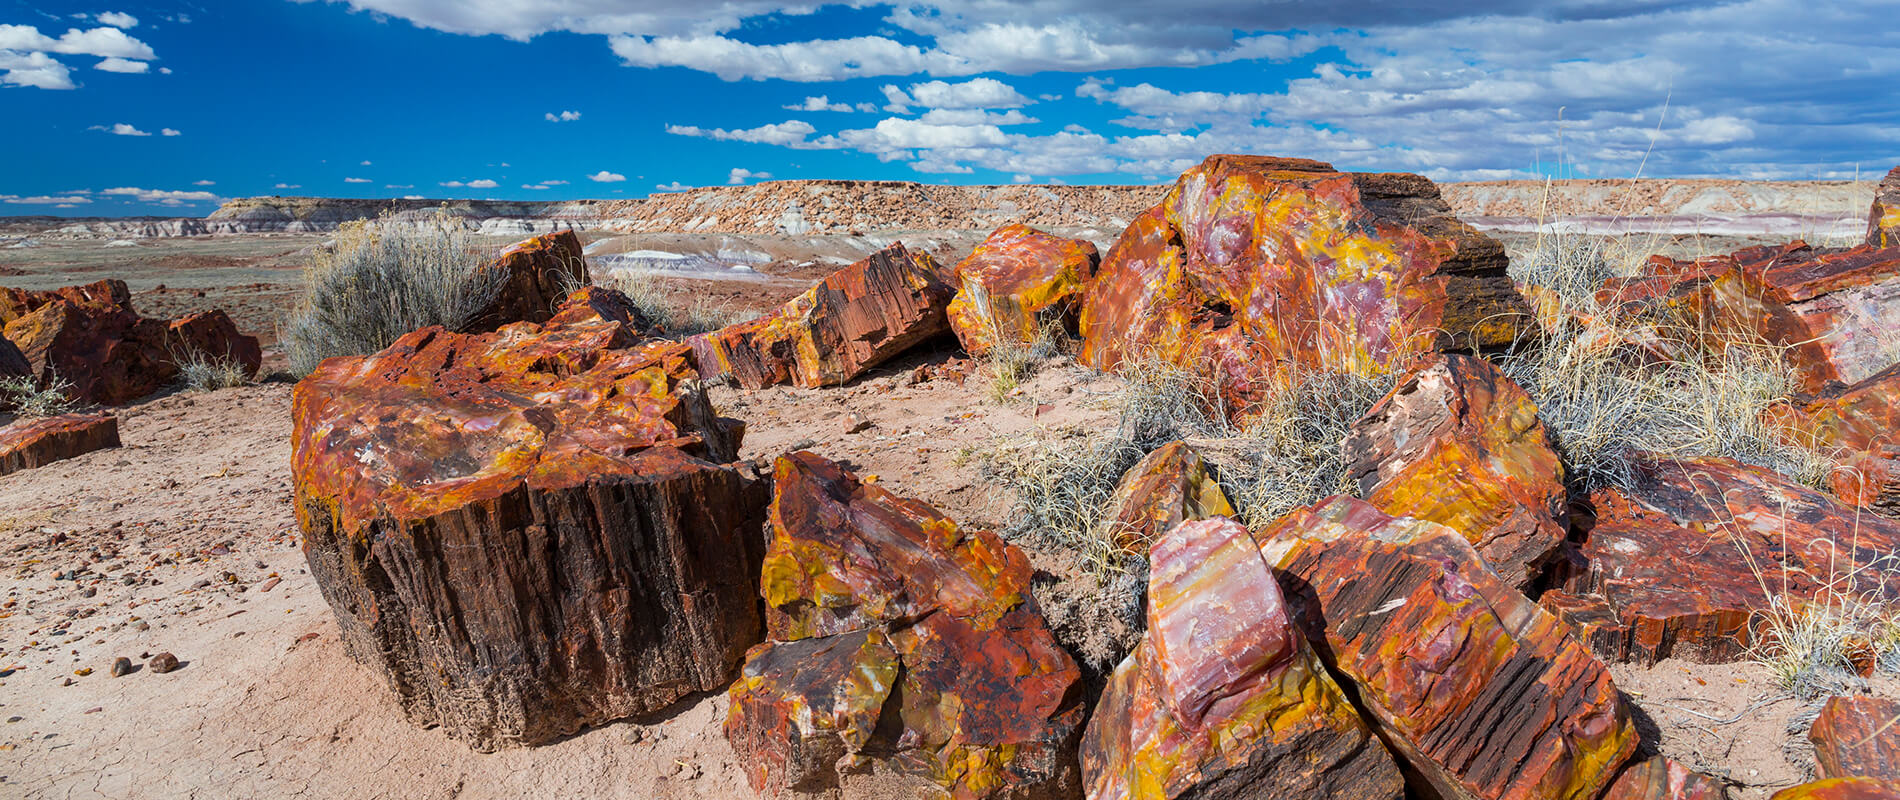 MyBestPlace - The Petrified Forest in Arizona, a masterpiece of nature in the heart of America